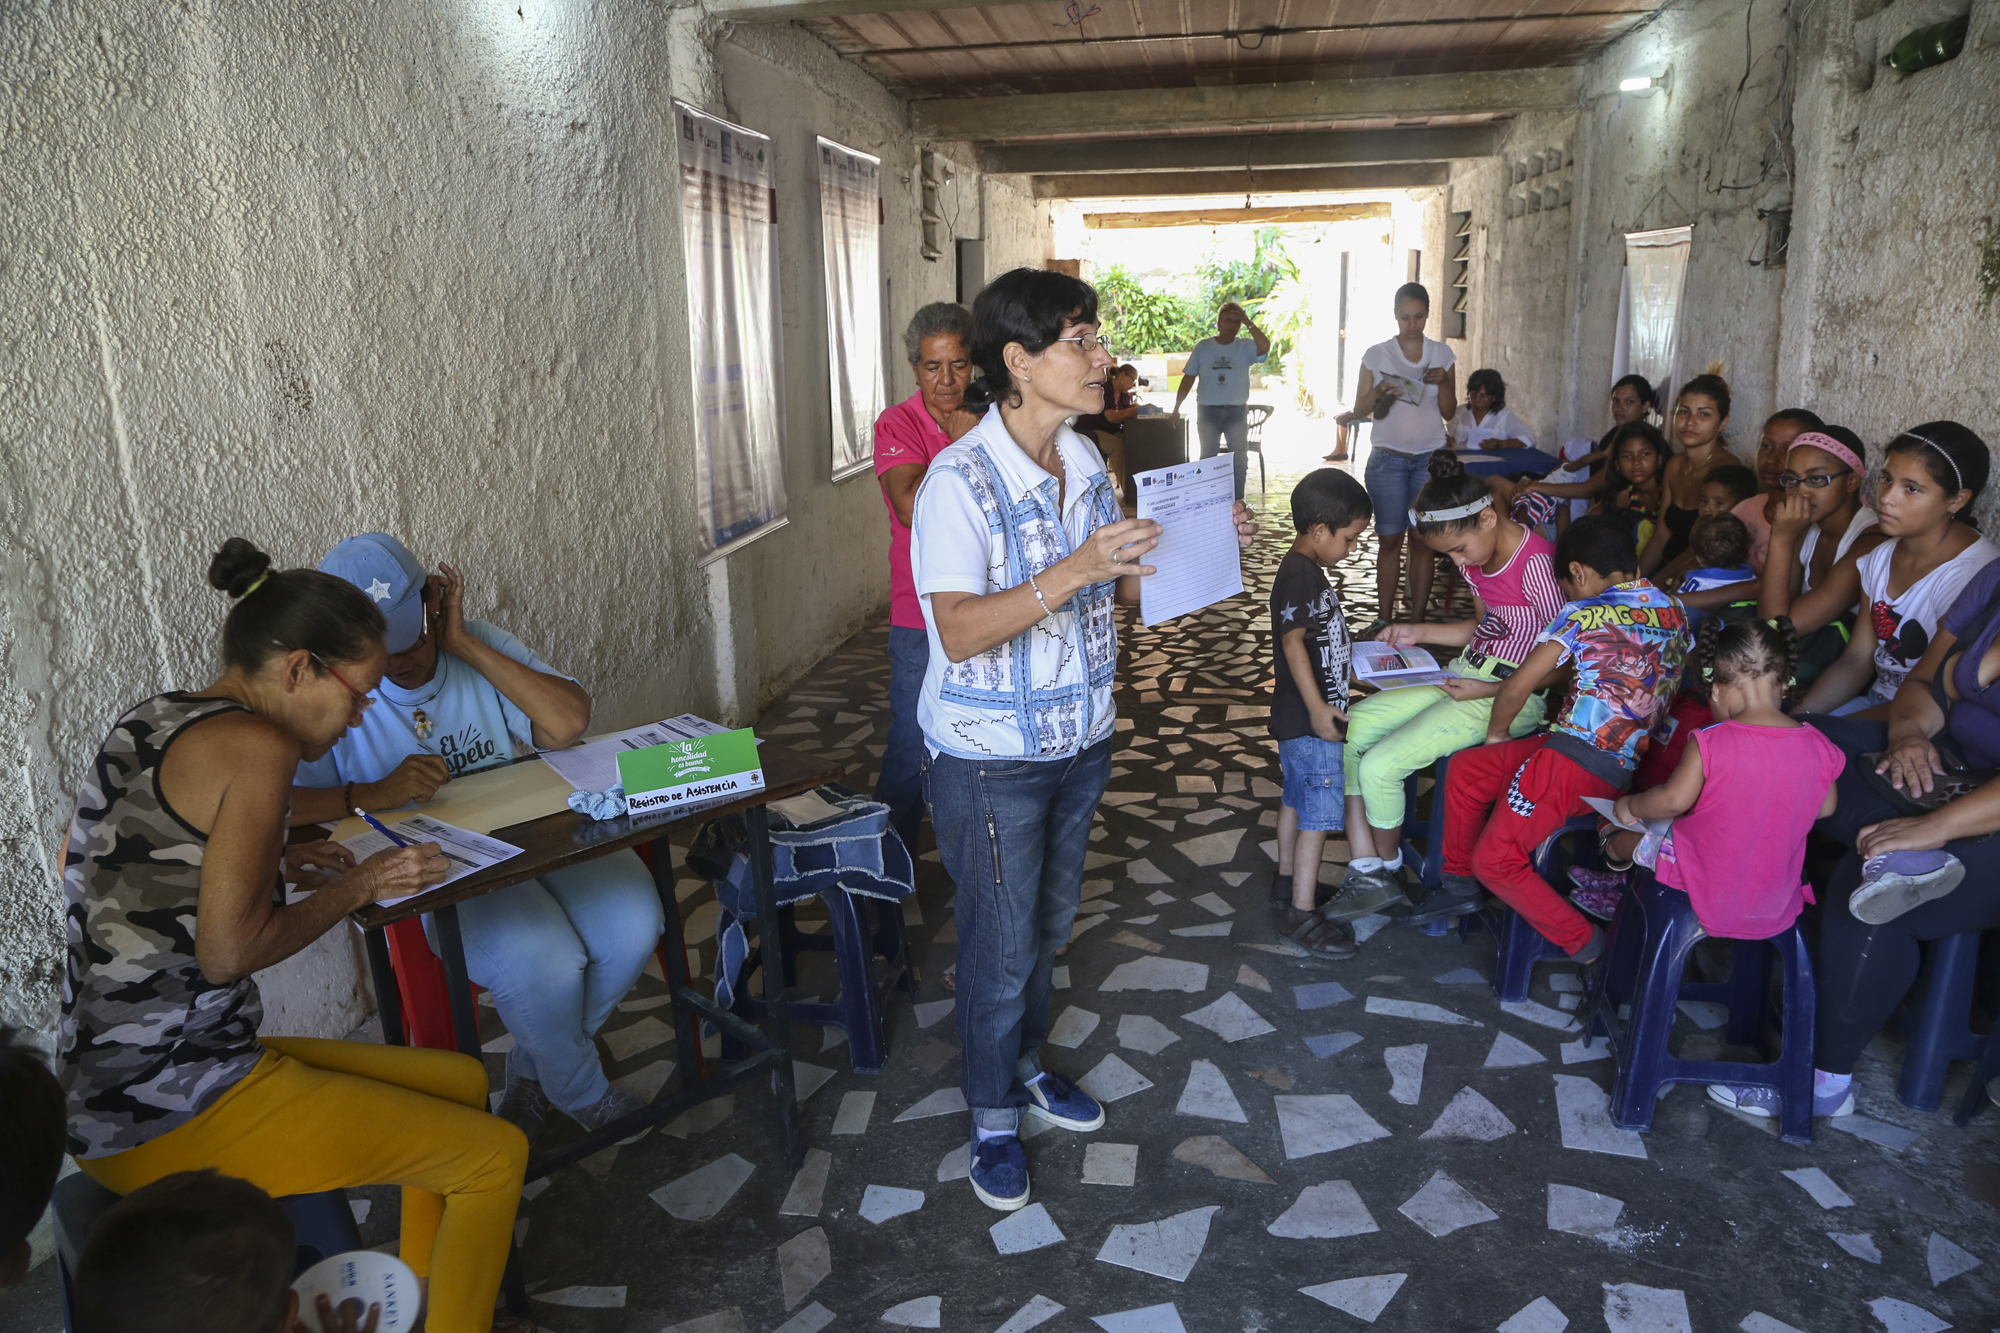 Caritas Venezuela volunteer Dr. Albina Rosas leads caregivers in a nutrition session and how to protect their children from disease. Children already vulnerable due to under-nutrition have a harder time fending off disease.